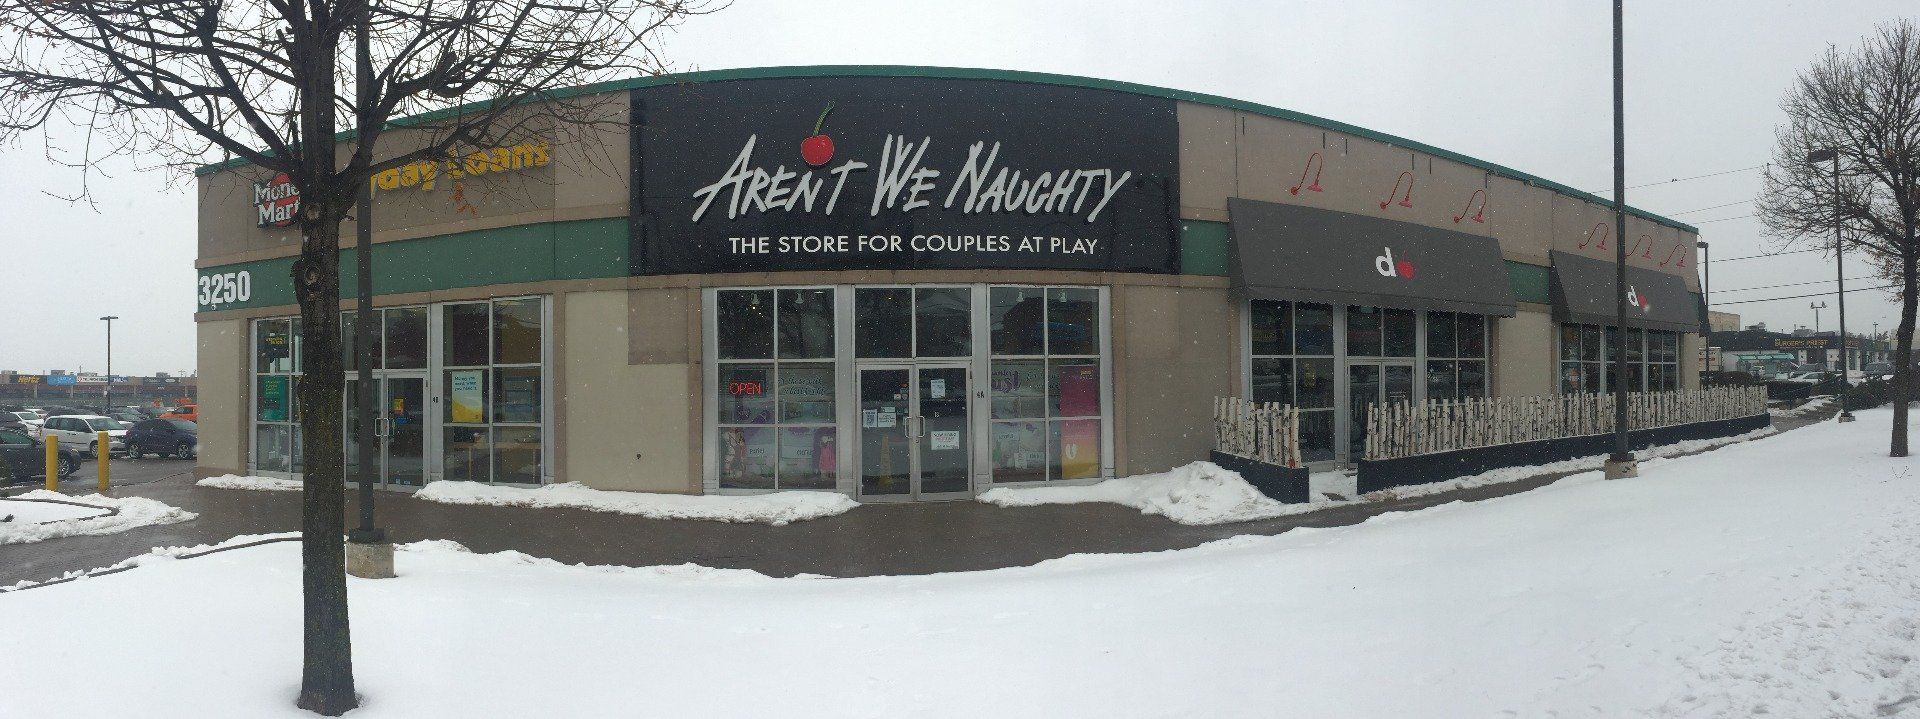 best of By nature sex store Naughty